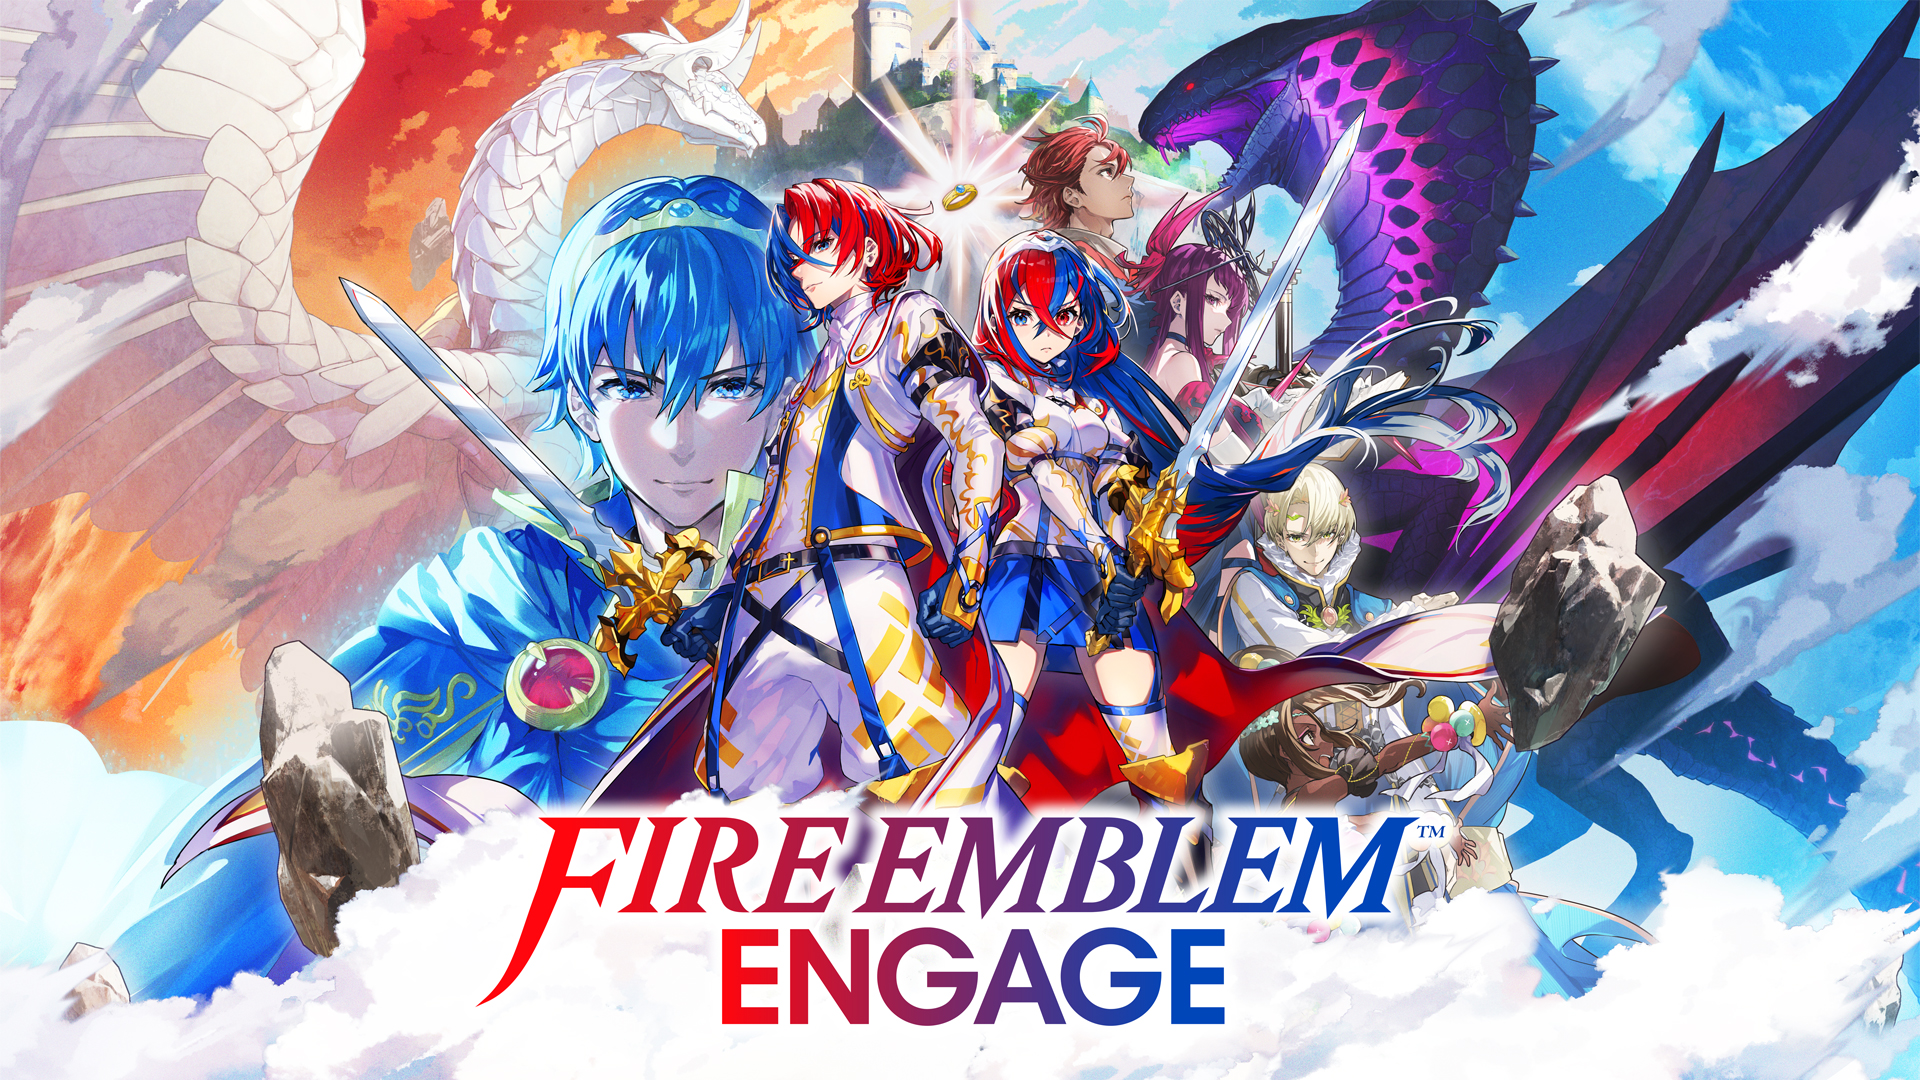 Summon past heroes in Fire Emblem Engage